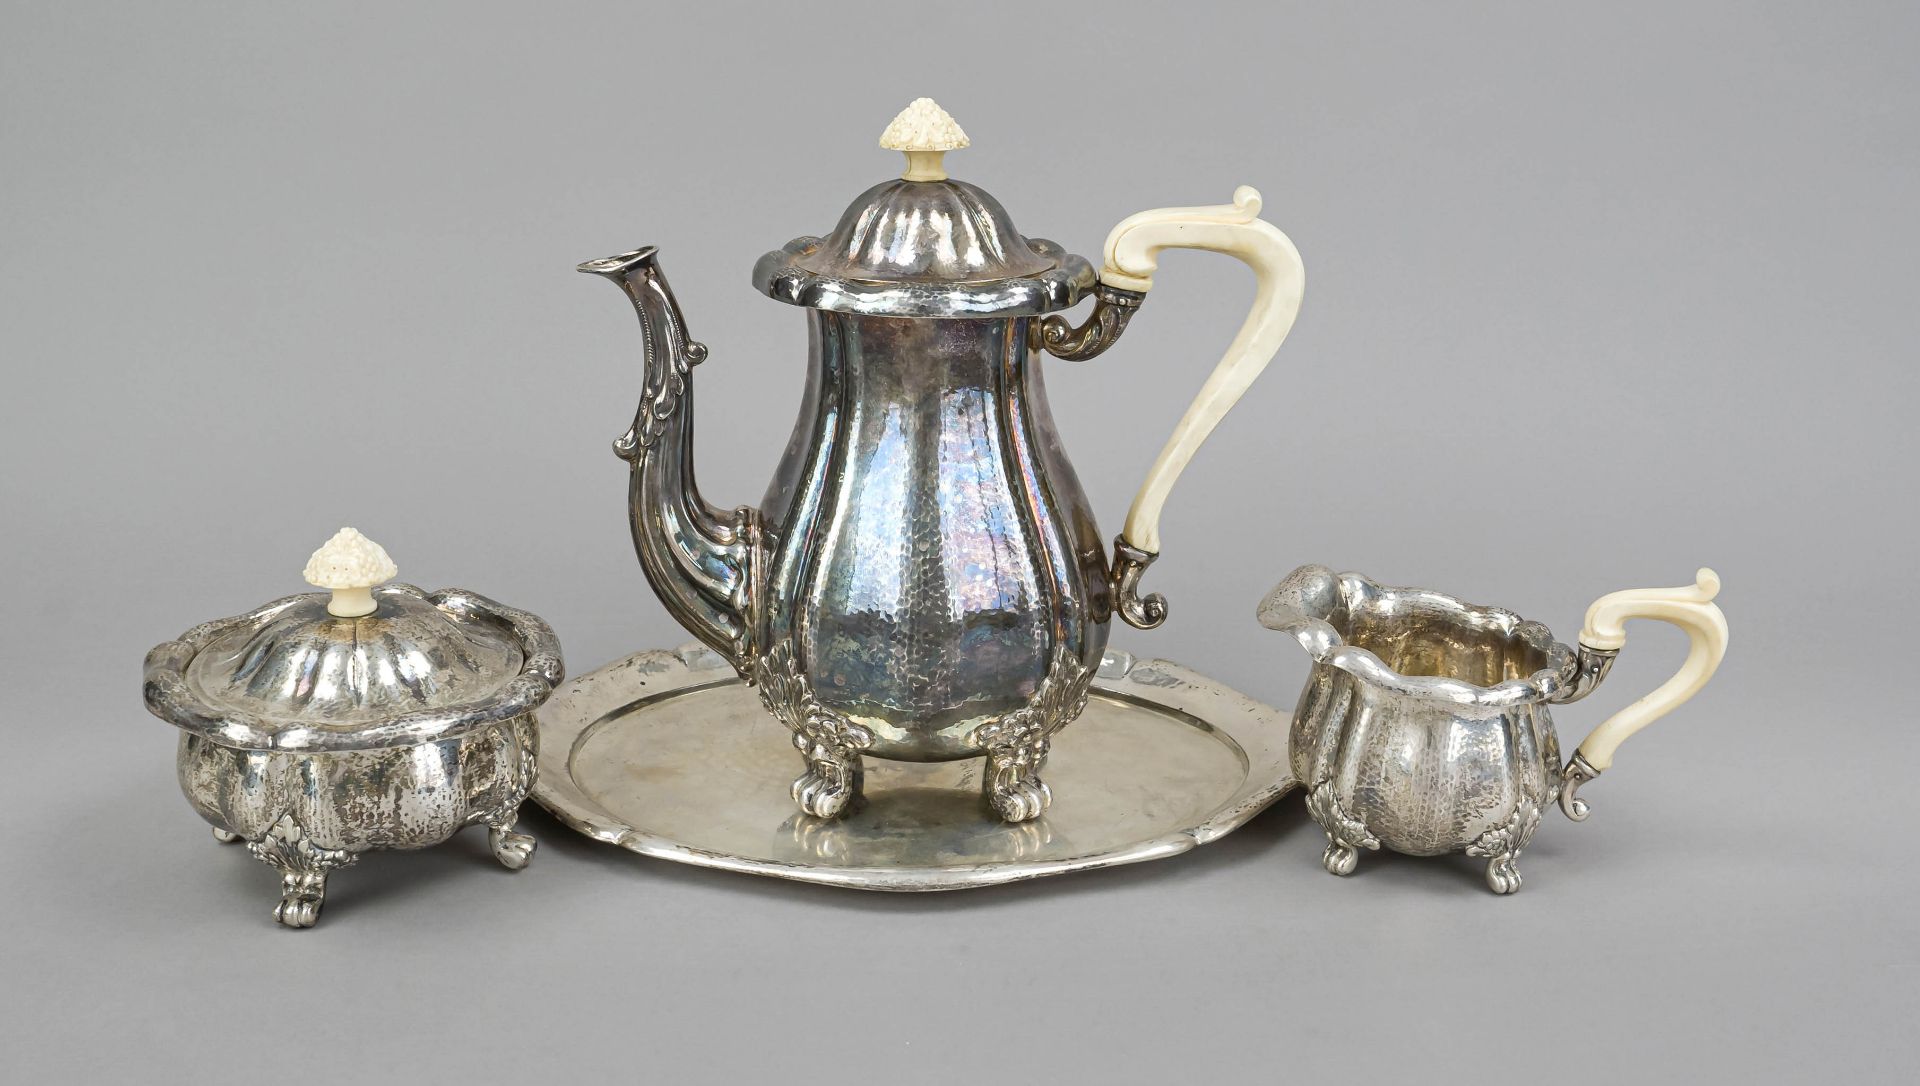 A three-piece coffee pot and oval tray, German, c. 1930, maker's mark J. D. Schleissner & Söhne,